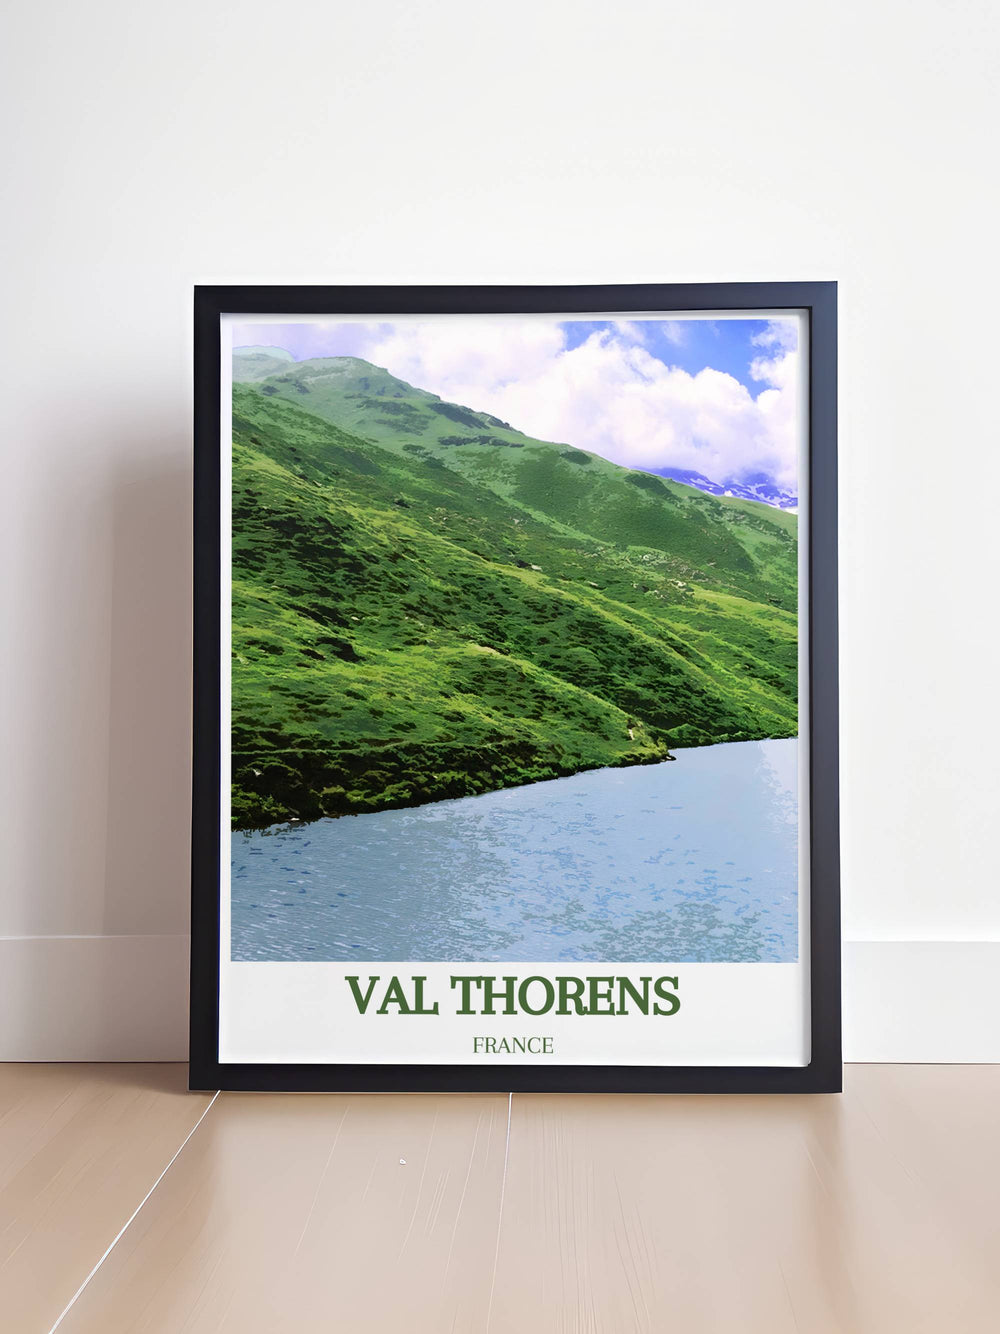 Lac du Lou framed art showcasing the tranquil lake and snow covered peaks of Val Thorens in the French Alps. Perfect for enhancing your living space with the serene beauty and elegance of this iconic ski resort.